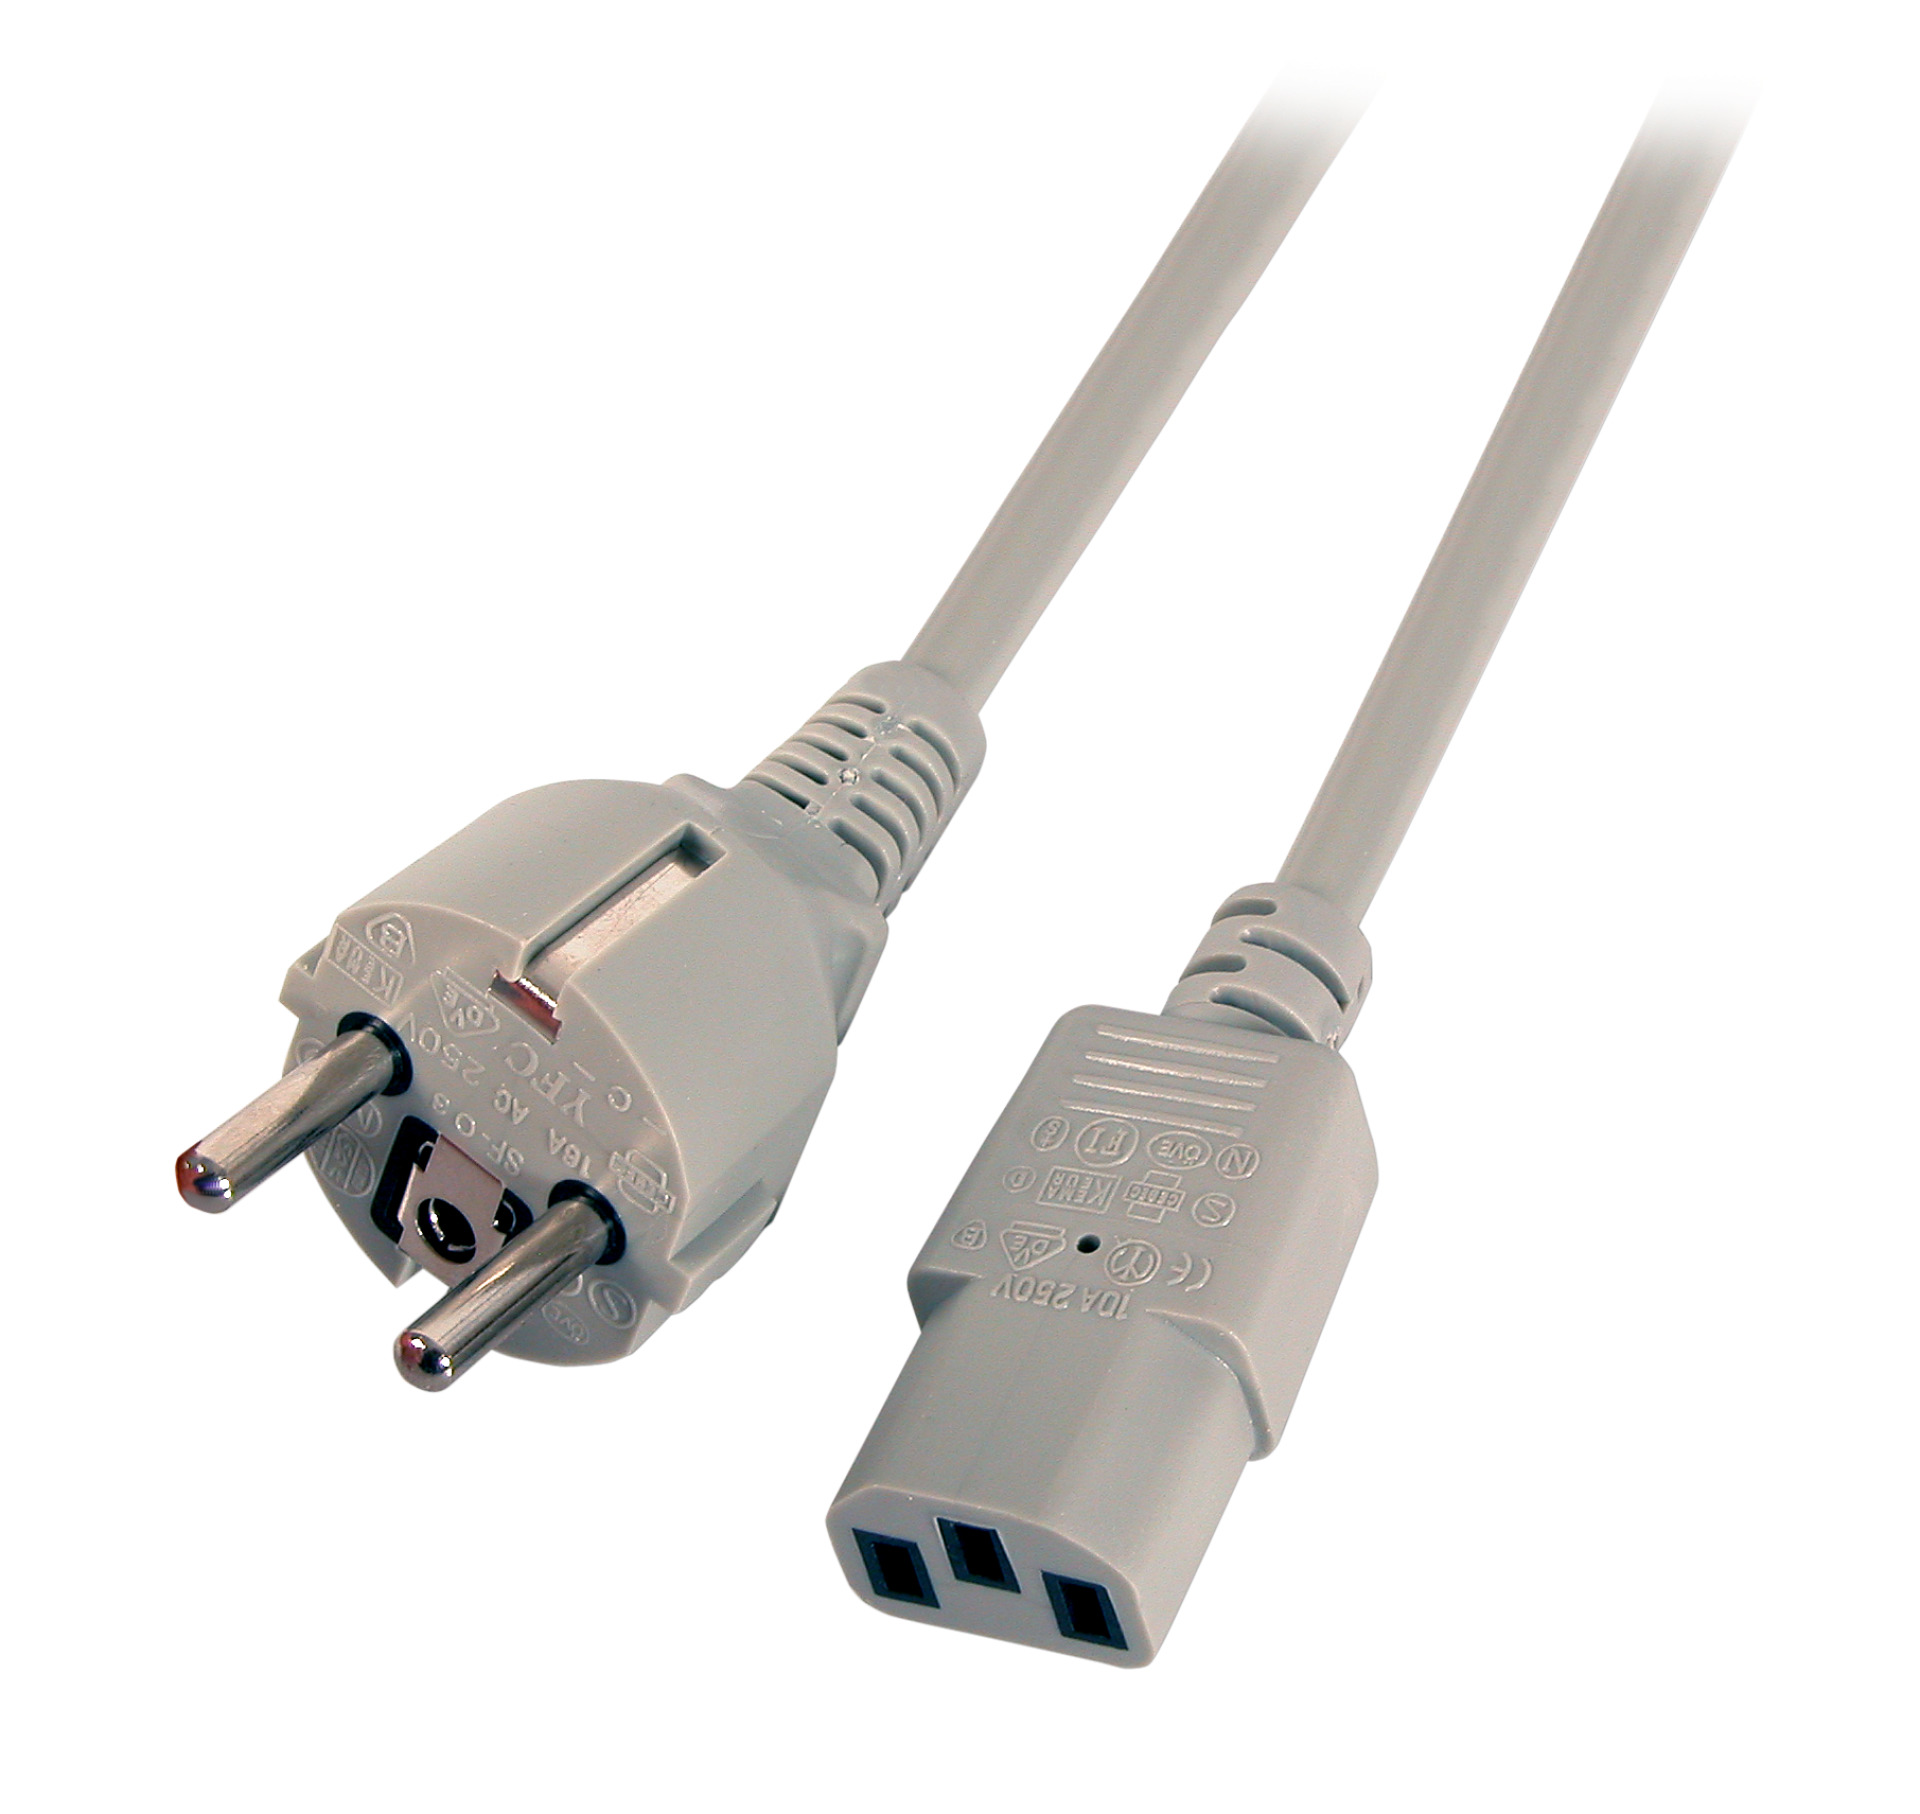 Power Cable CEE7/7 180° - C13 180°, Grey, 2.0 m, 3 x 0.75 mm²